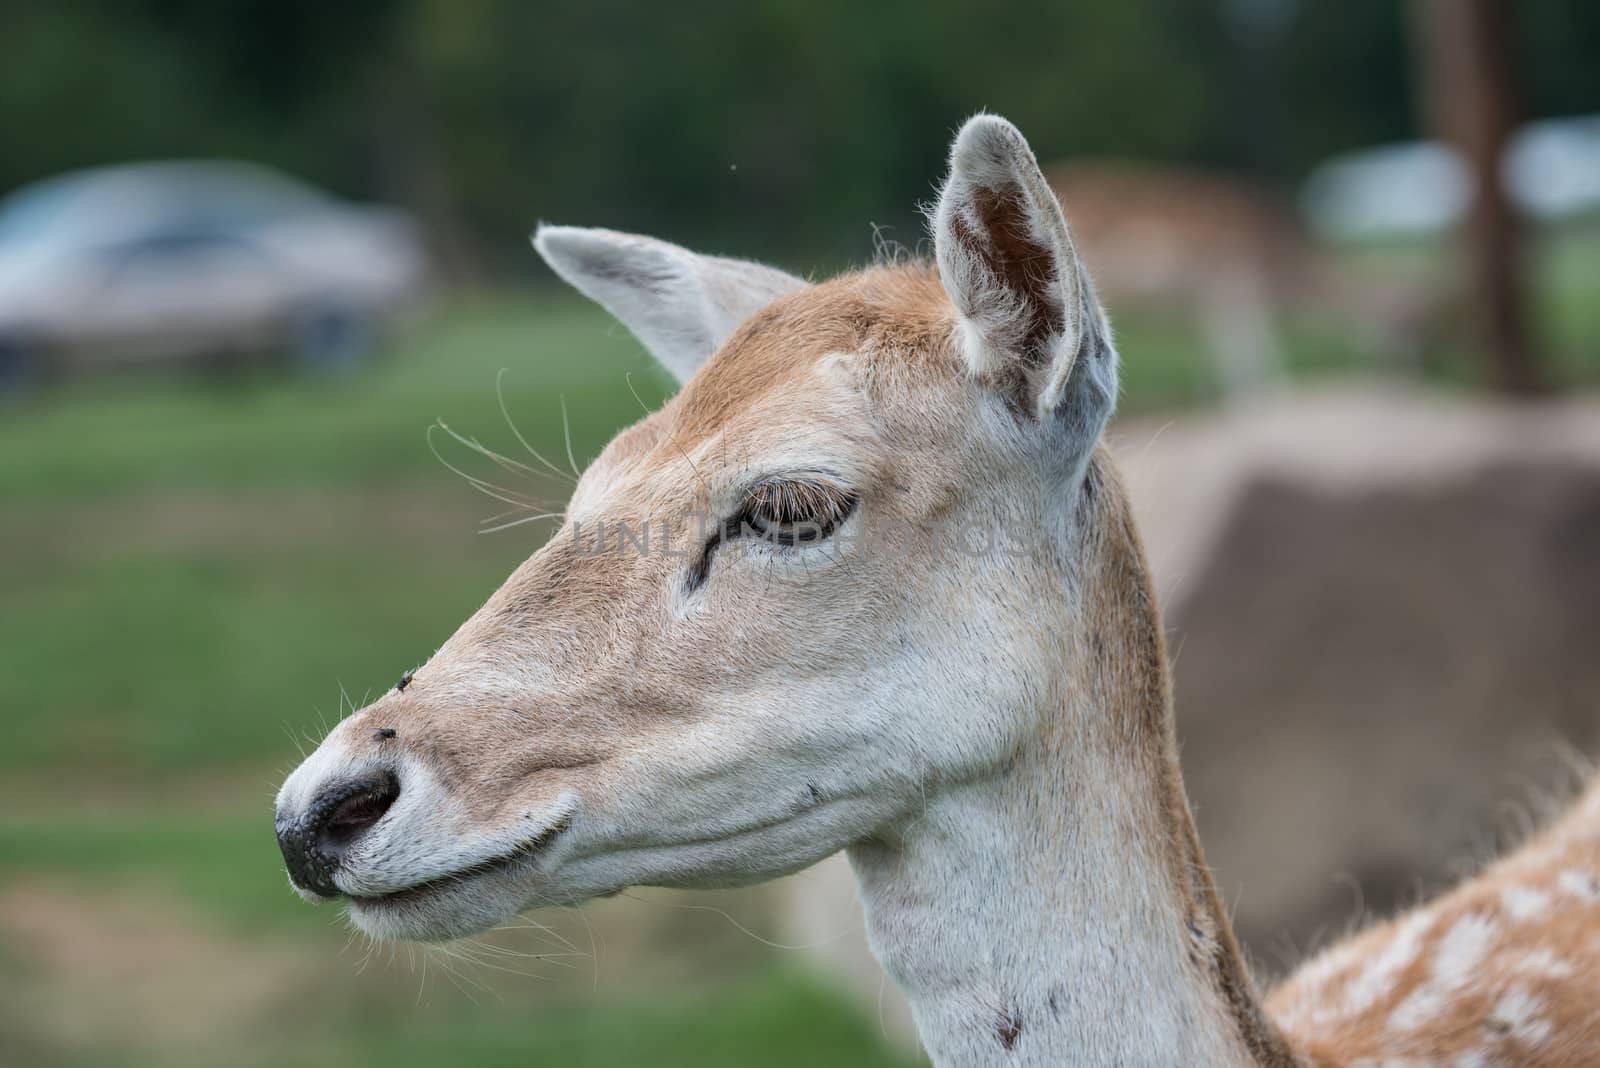 Close up of the face of a female deer 